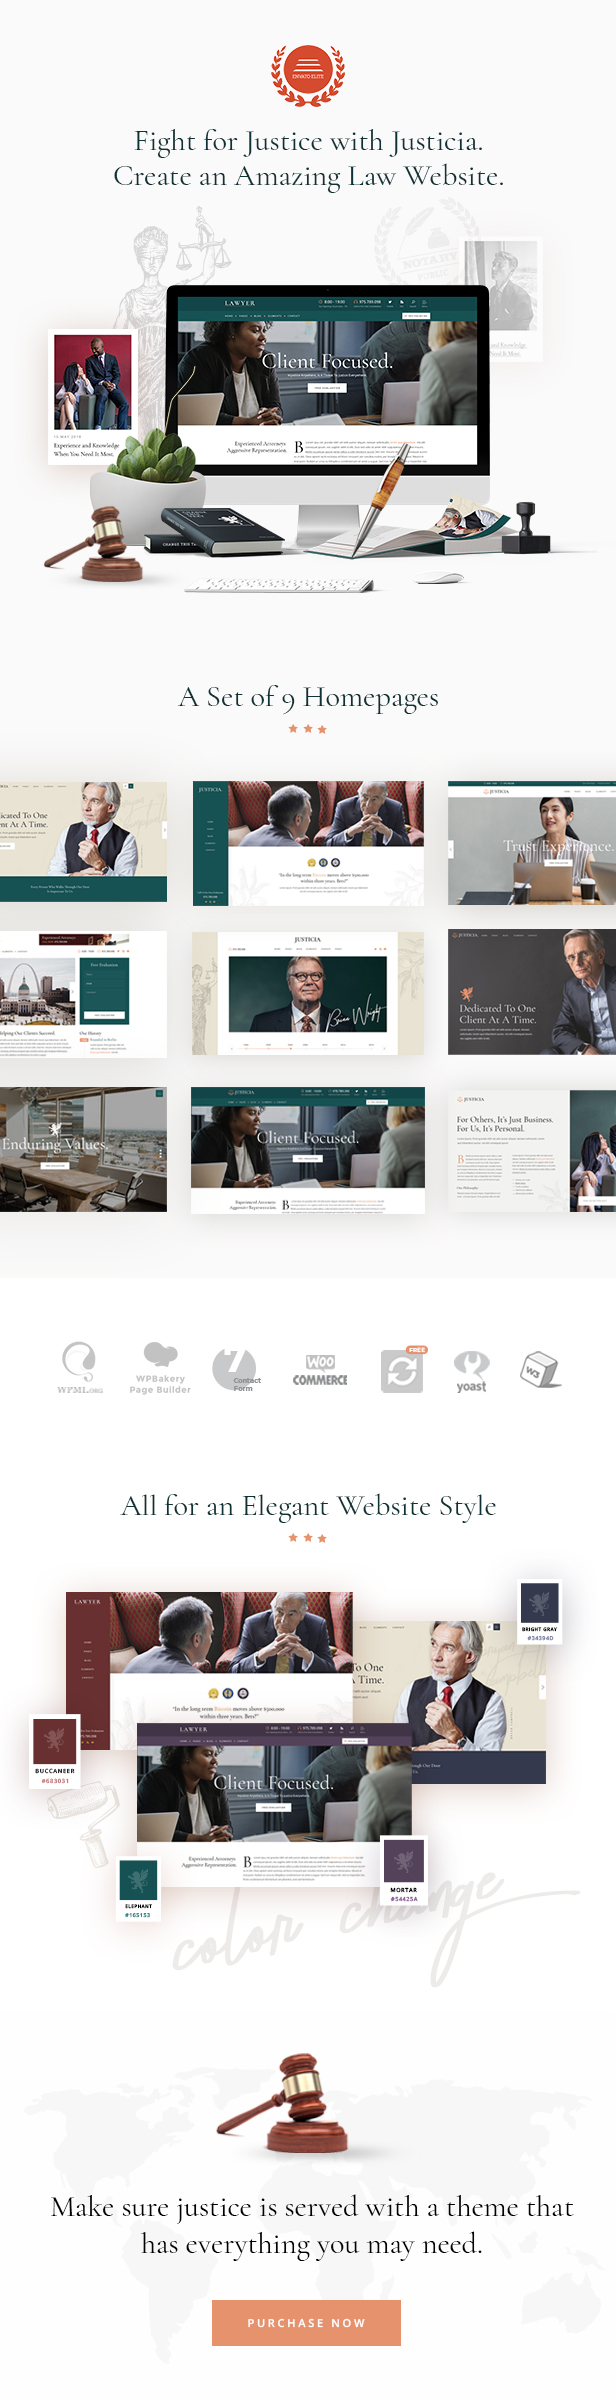 Justicia - Lawyer and Law Firm Theme - 1